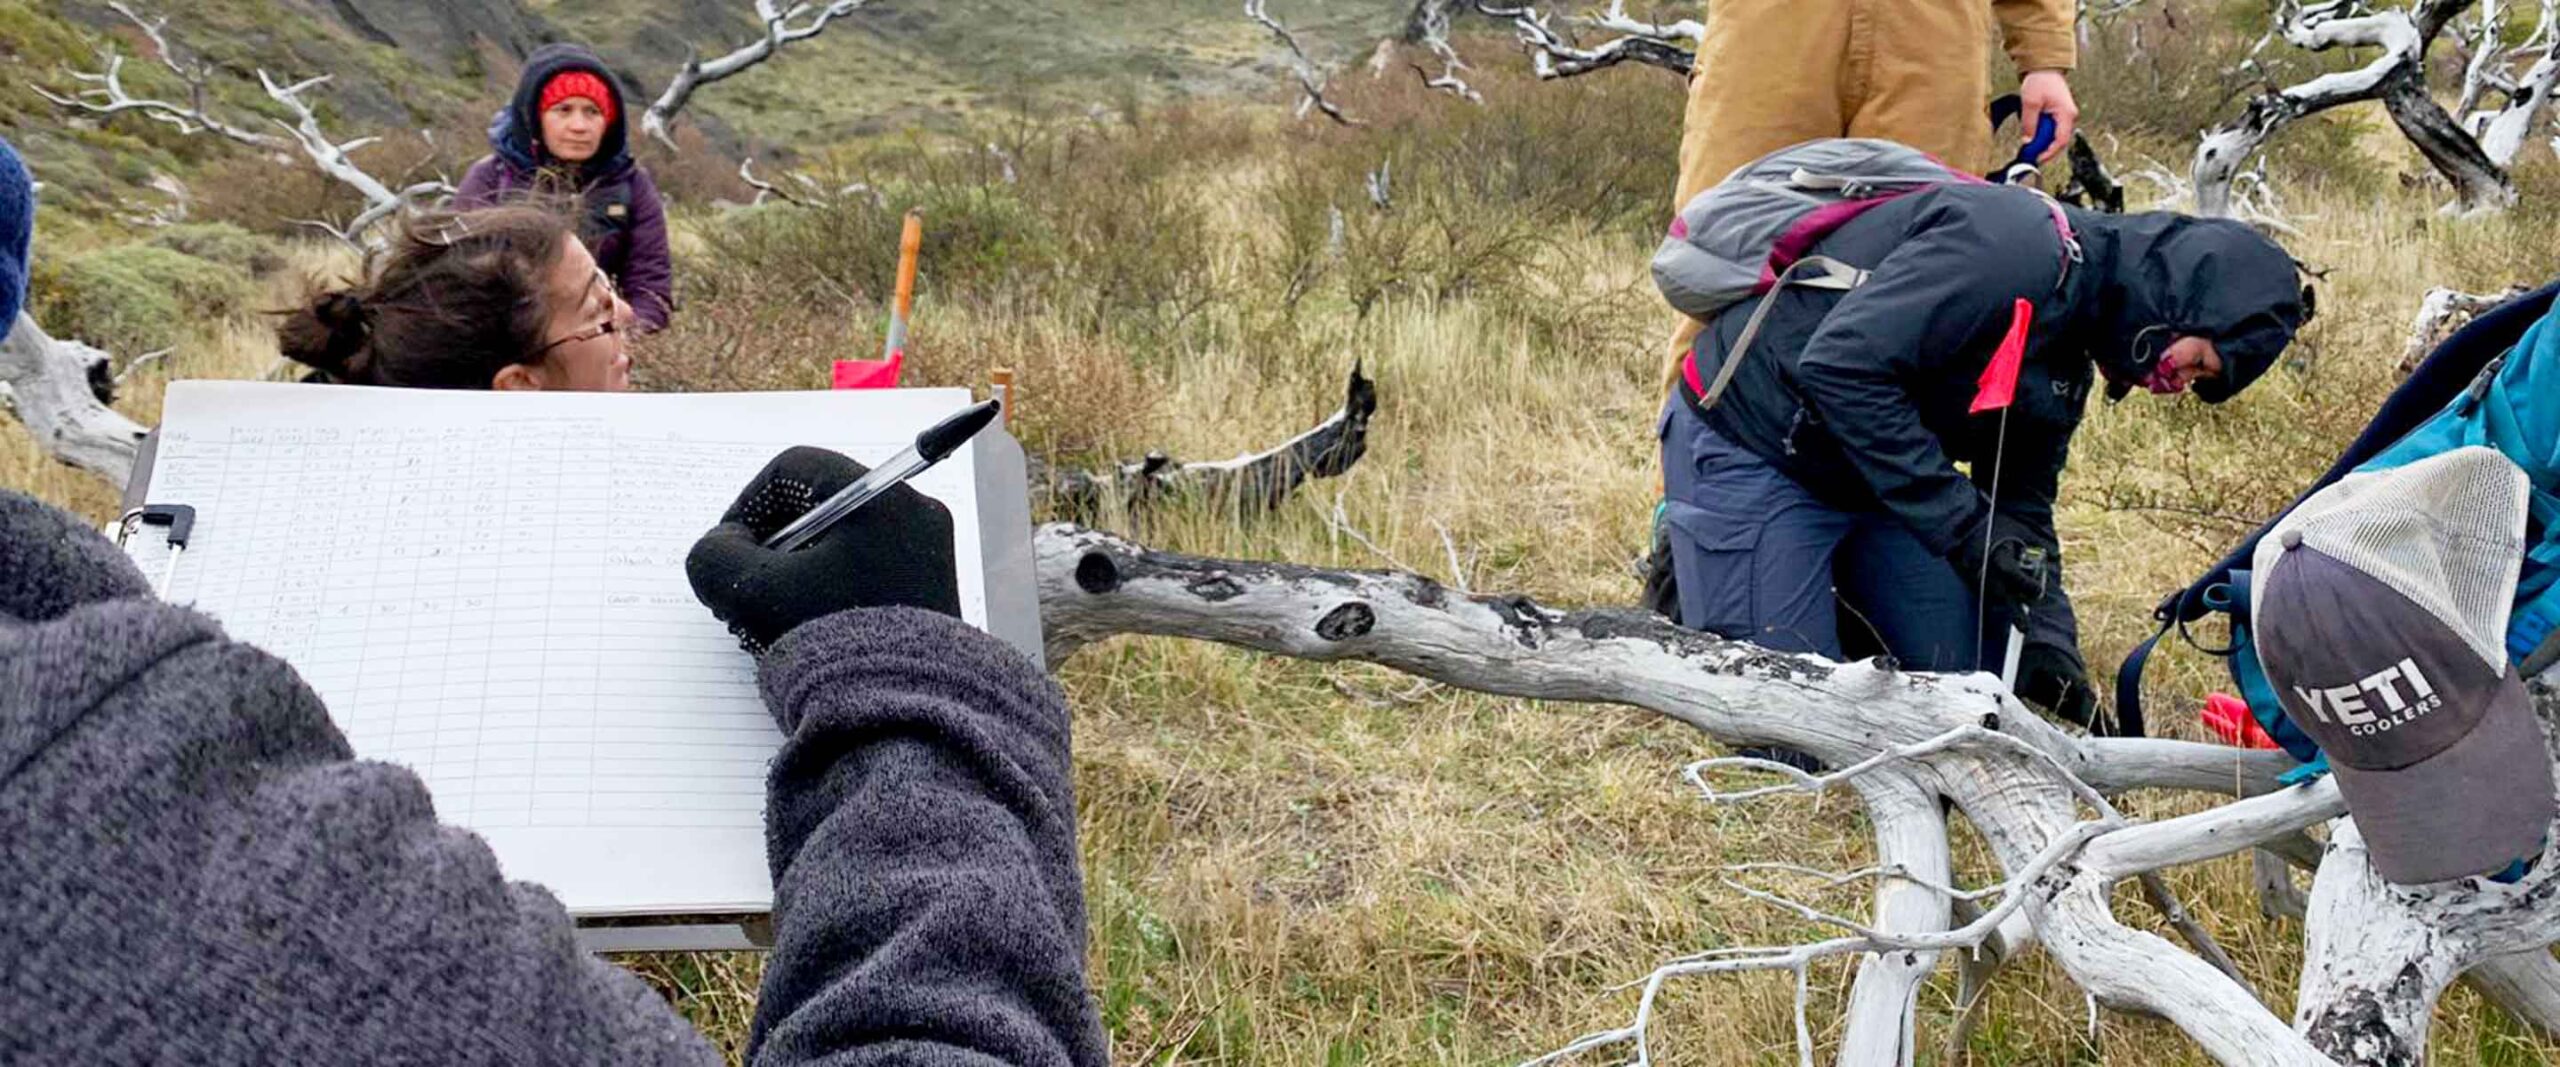 Monitoring Lenga Tree Reforestation in Torres del Paine